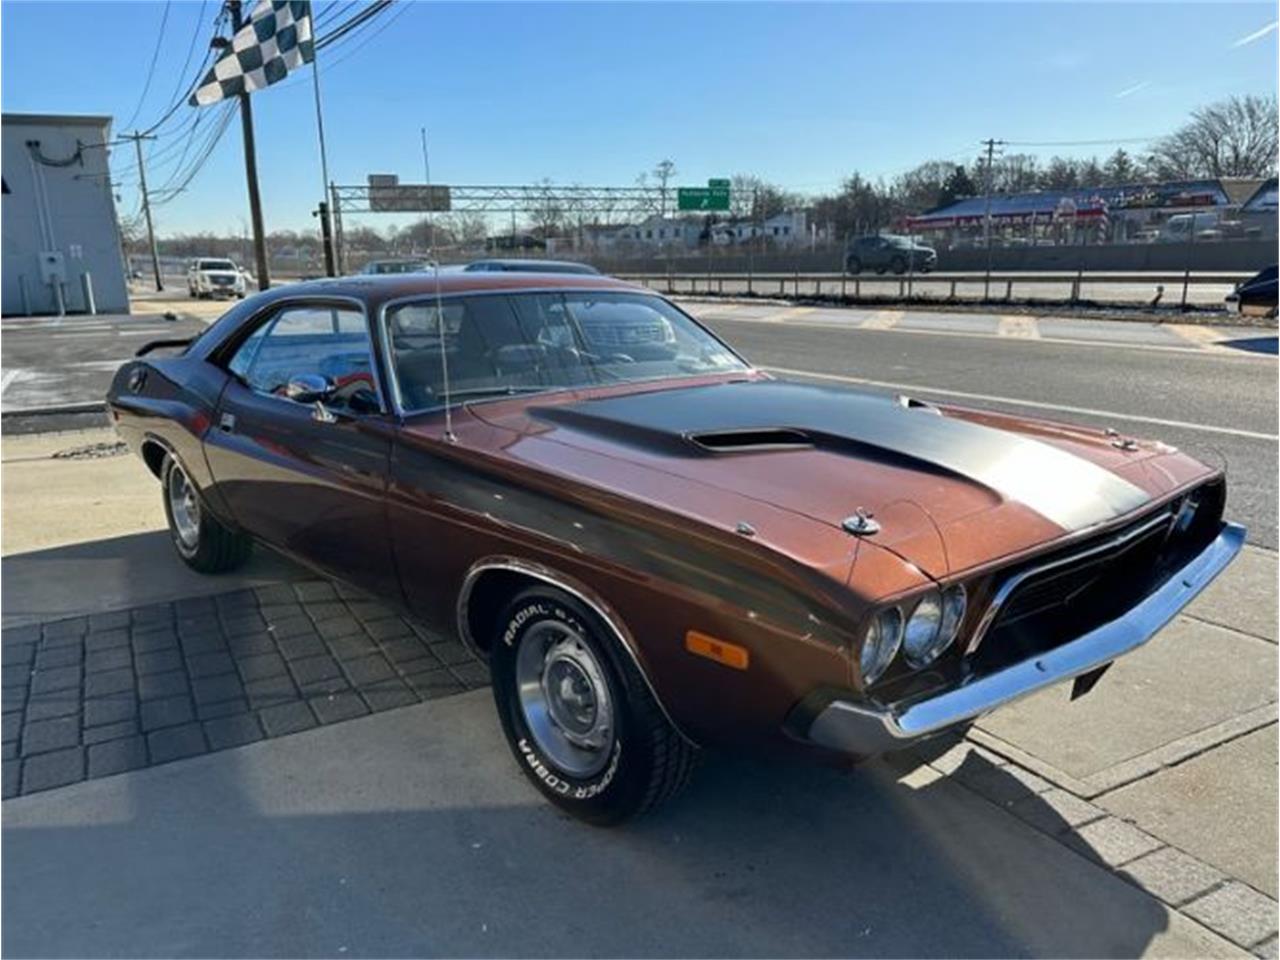 For Sale: 1973 Dodge Challenger in Cadillac, Michigan for sale in Cadillac, MI